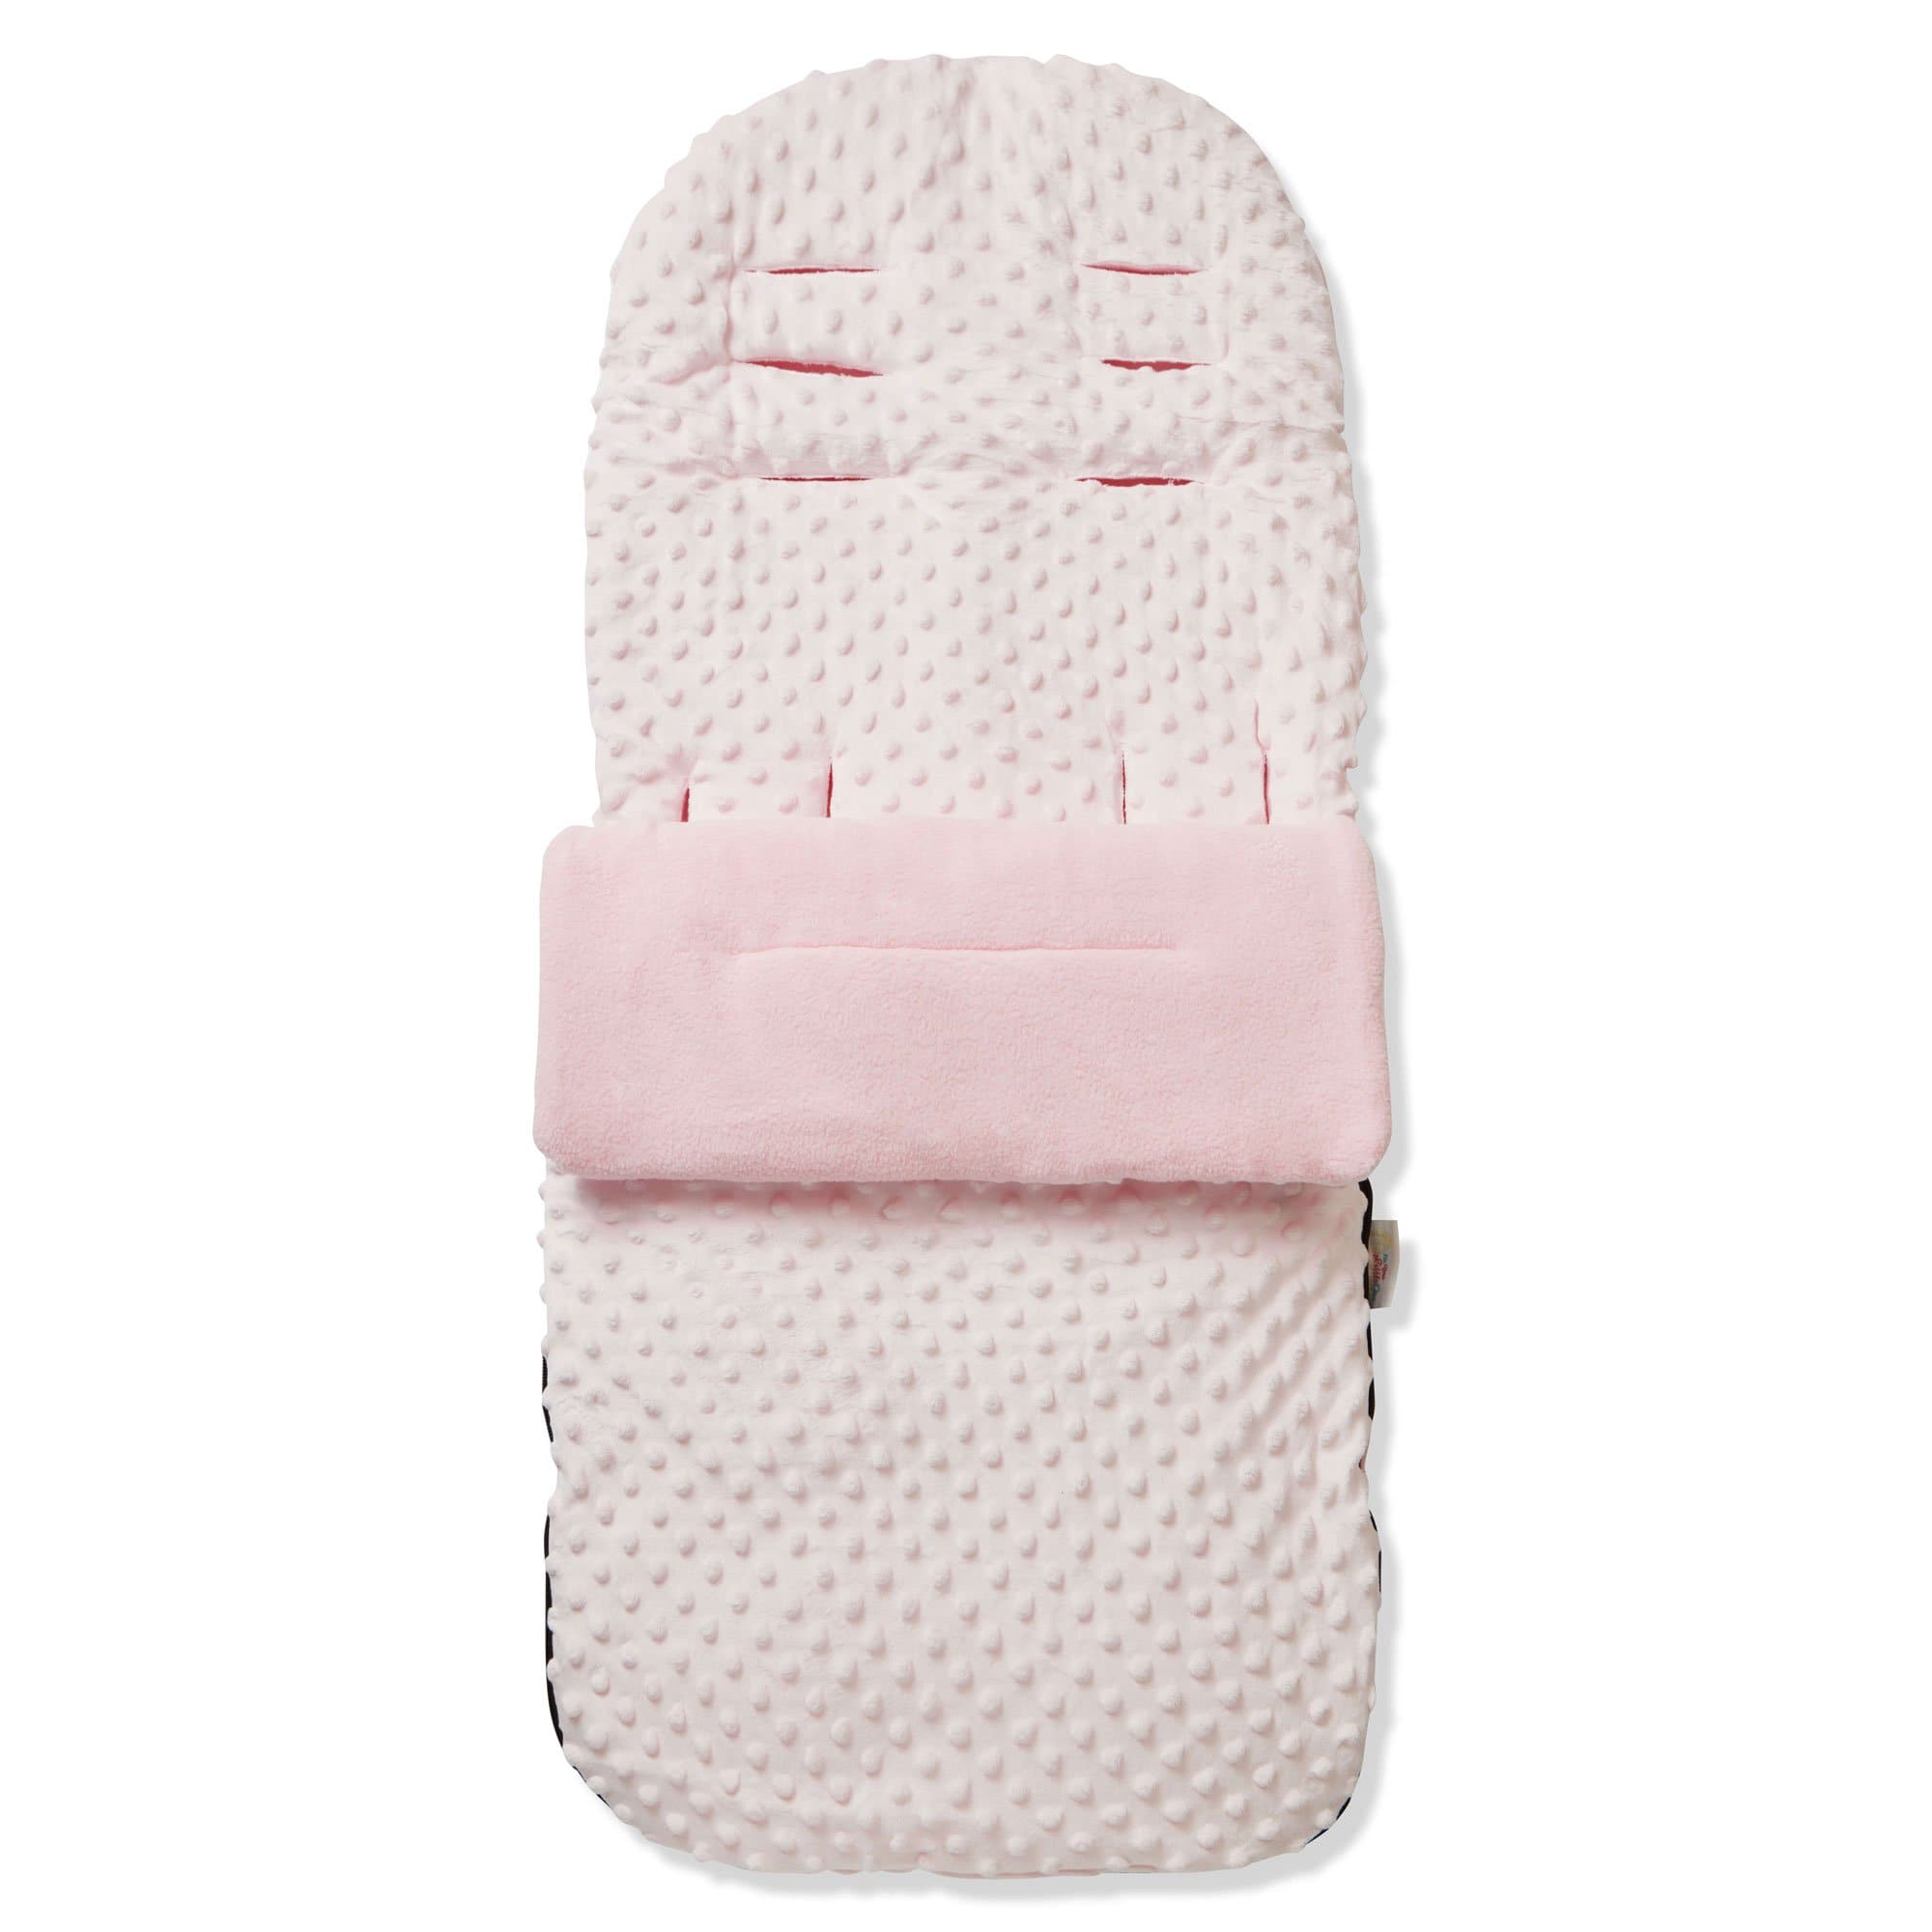 Dimple Footmuff / Cosy Toes Compatible with Nania - Pink / Fits All Models | For Your Little One